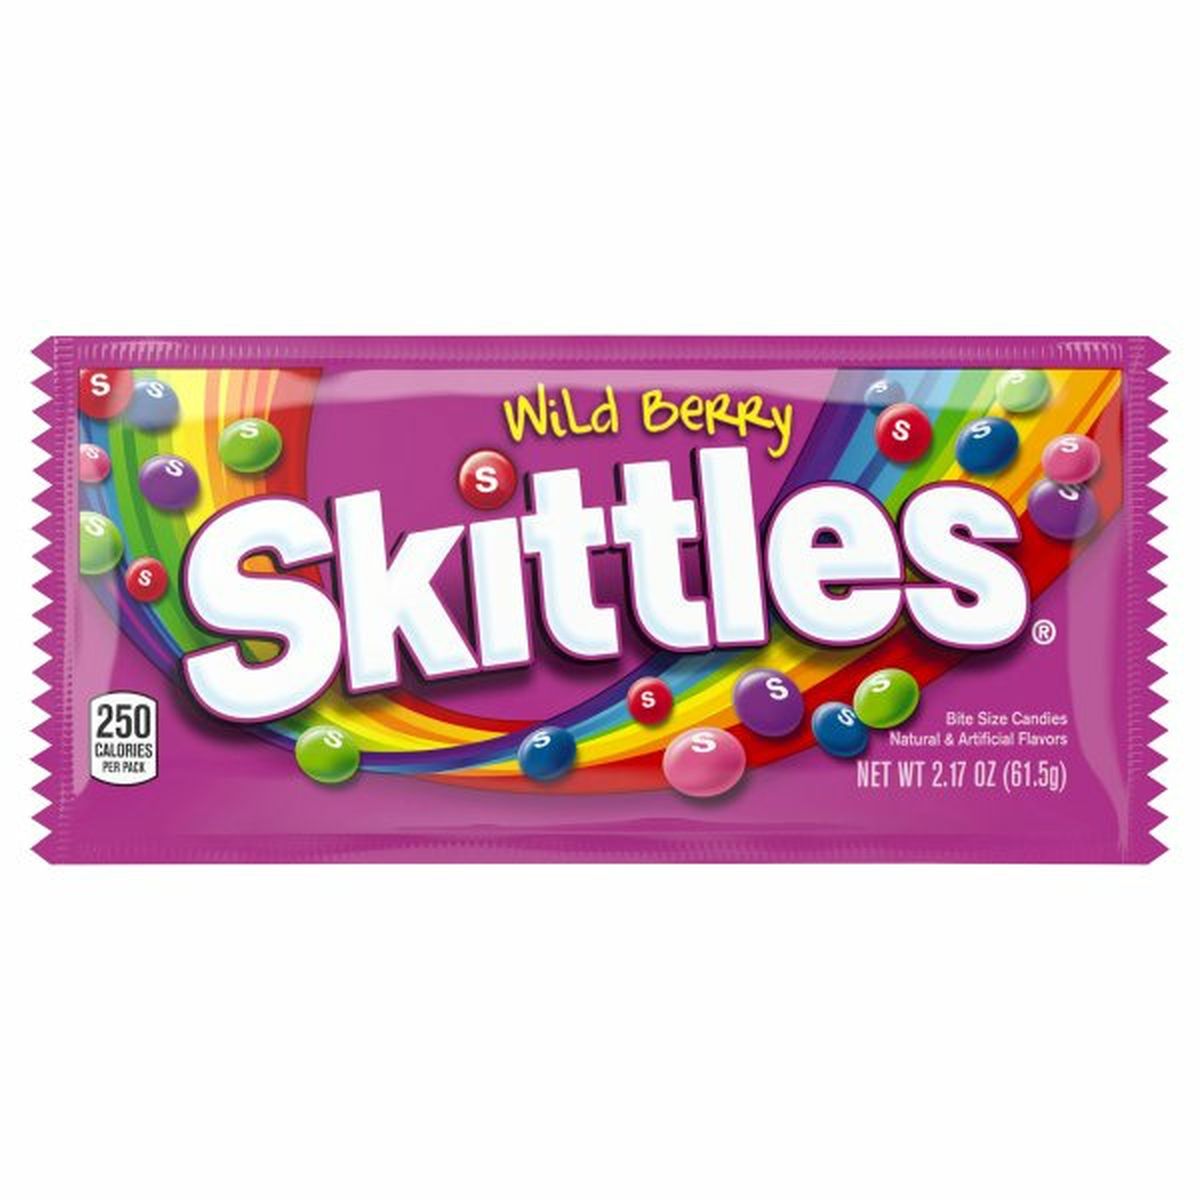 Calories in Skittles Wild Berry Candy Single